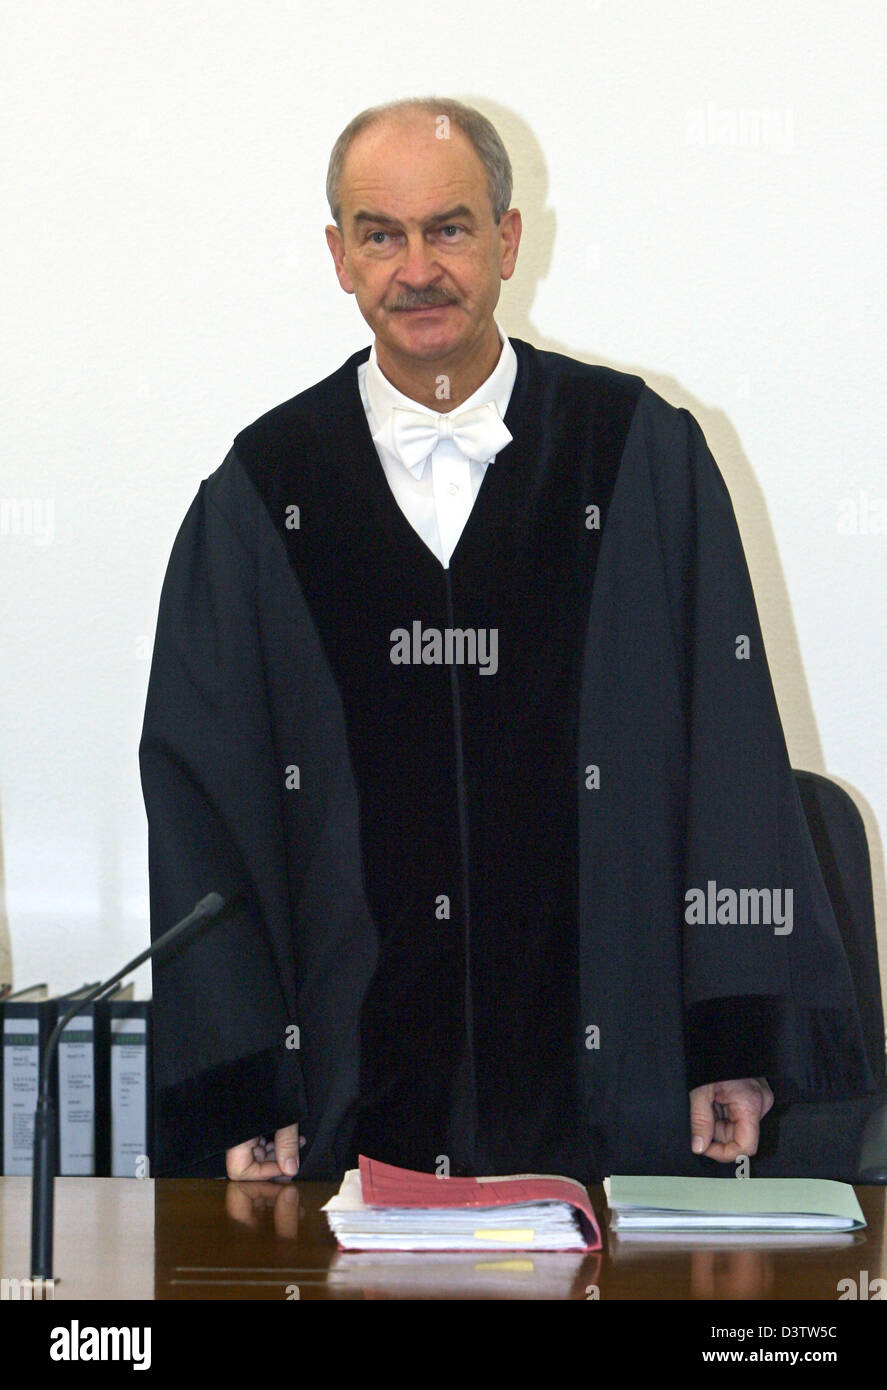 Chief judge Harry Rechner stands inside the district court in Kempten/Allgaeu, Germany, Monday, 20 November 2006. The court in Kempten reached a verdict in the so called 'Todespfleger', (lit. 'Death Carer') trial. The defendant was found guilty of murder and man slaughter in several cases and sentenced to lifelong imprisonment. The court saw it as proven, that Stephan L. killed 28  Stock Photo